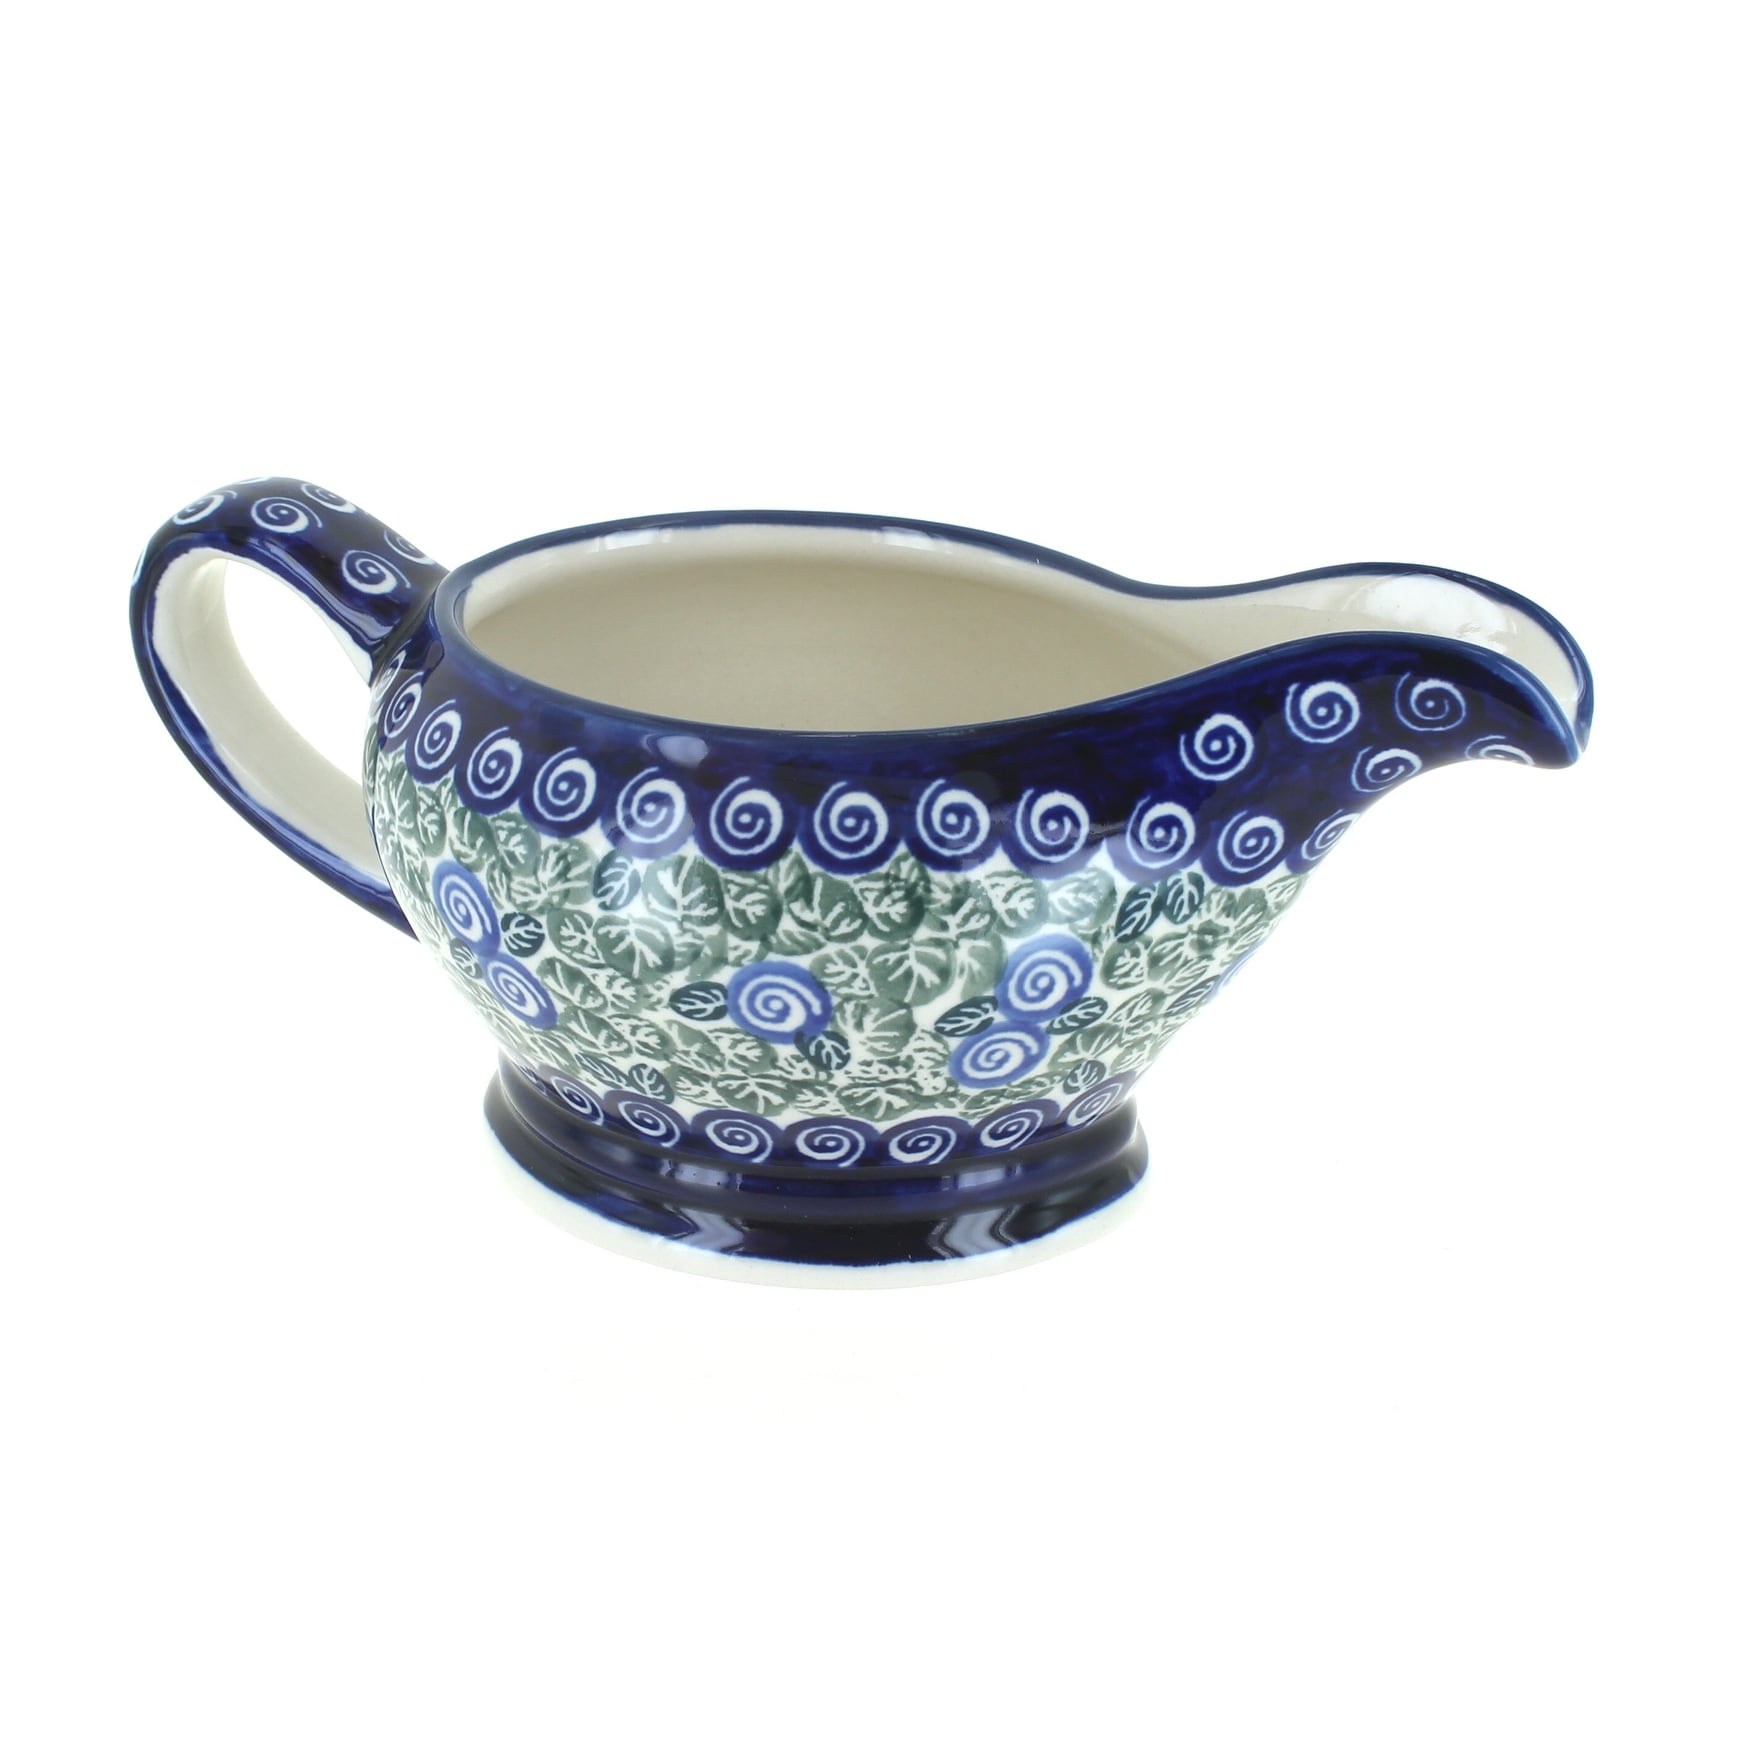 https://ak1.ostkcdn.com/images/products/is/images/direct/f975b166a269a9185e57cac5e5d3f68dac1b59c3/Blue-Rose-Polish-Pottery-1258-Zaklady-Gravy-Boat.jpg